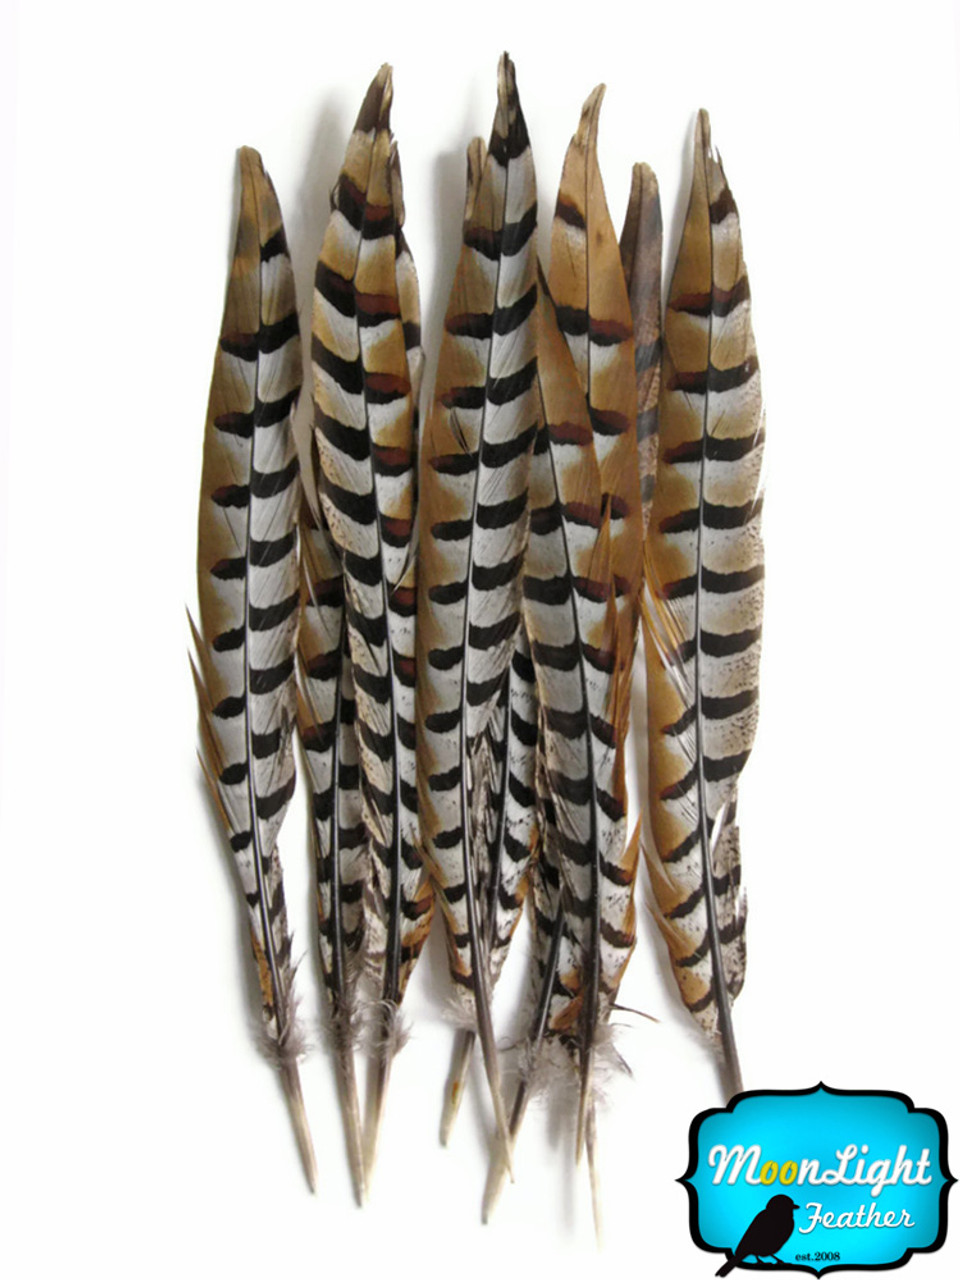 10 Pieces - 10-12 Natural Reeves Venery Pheasant Tail Feathers